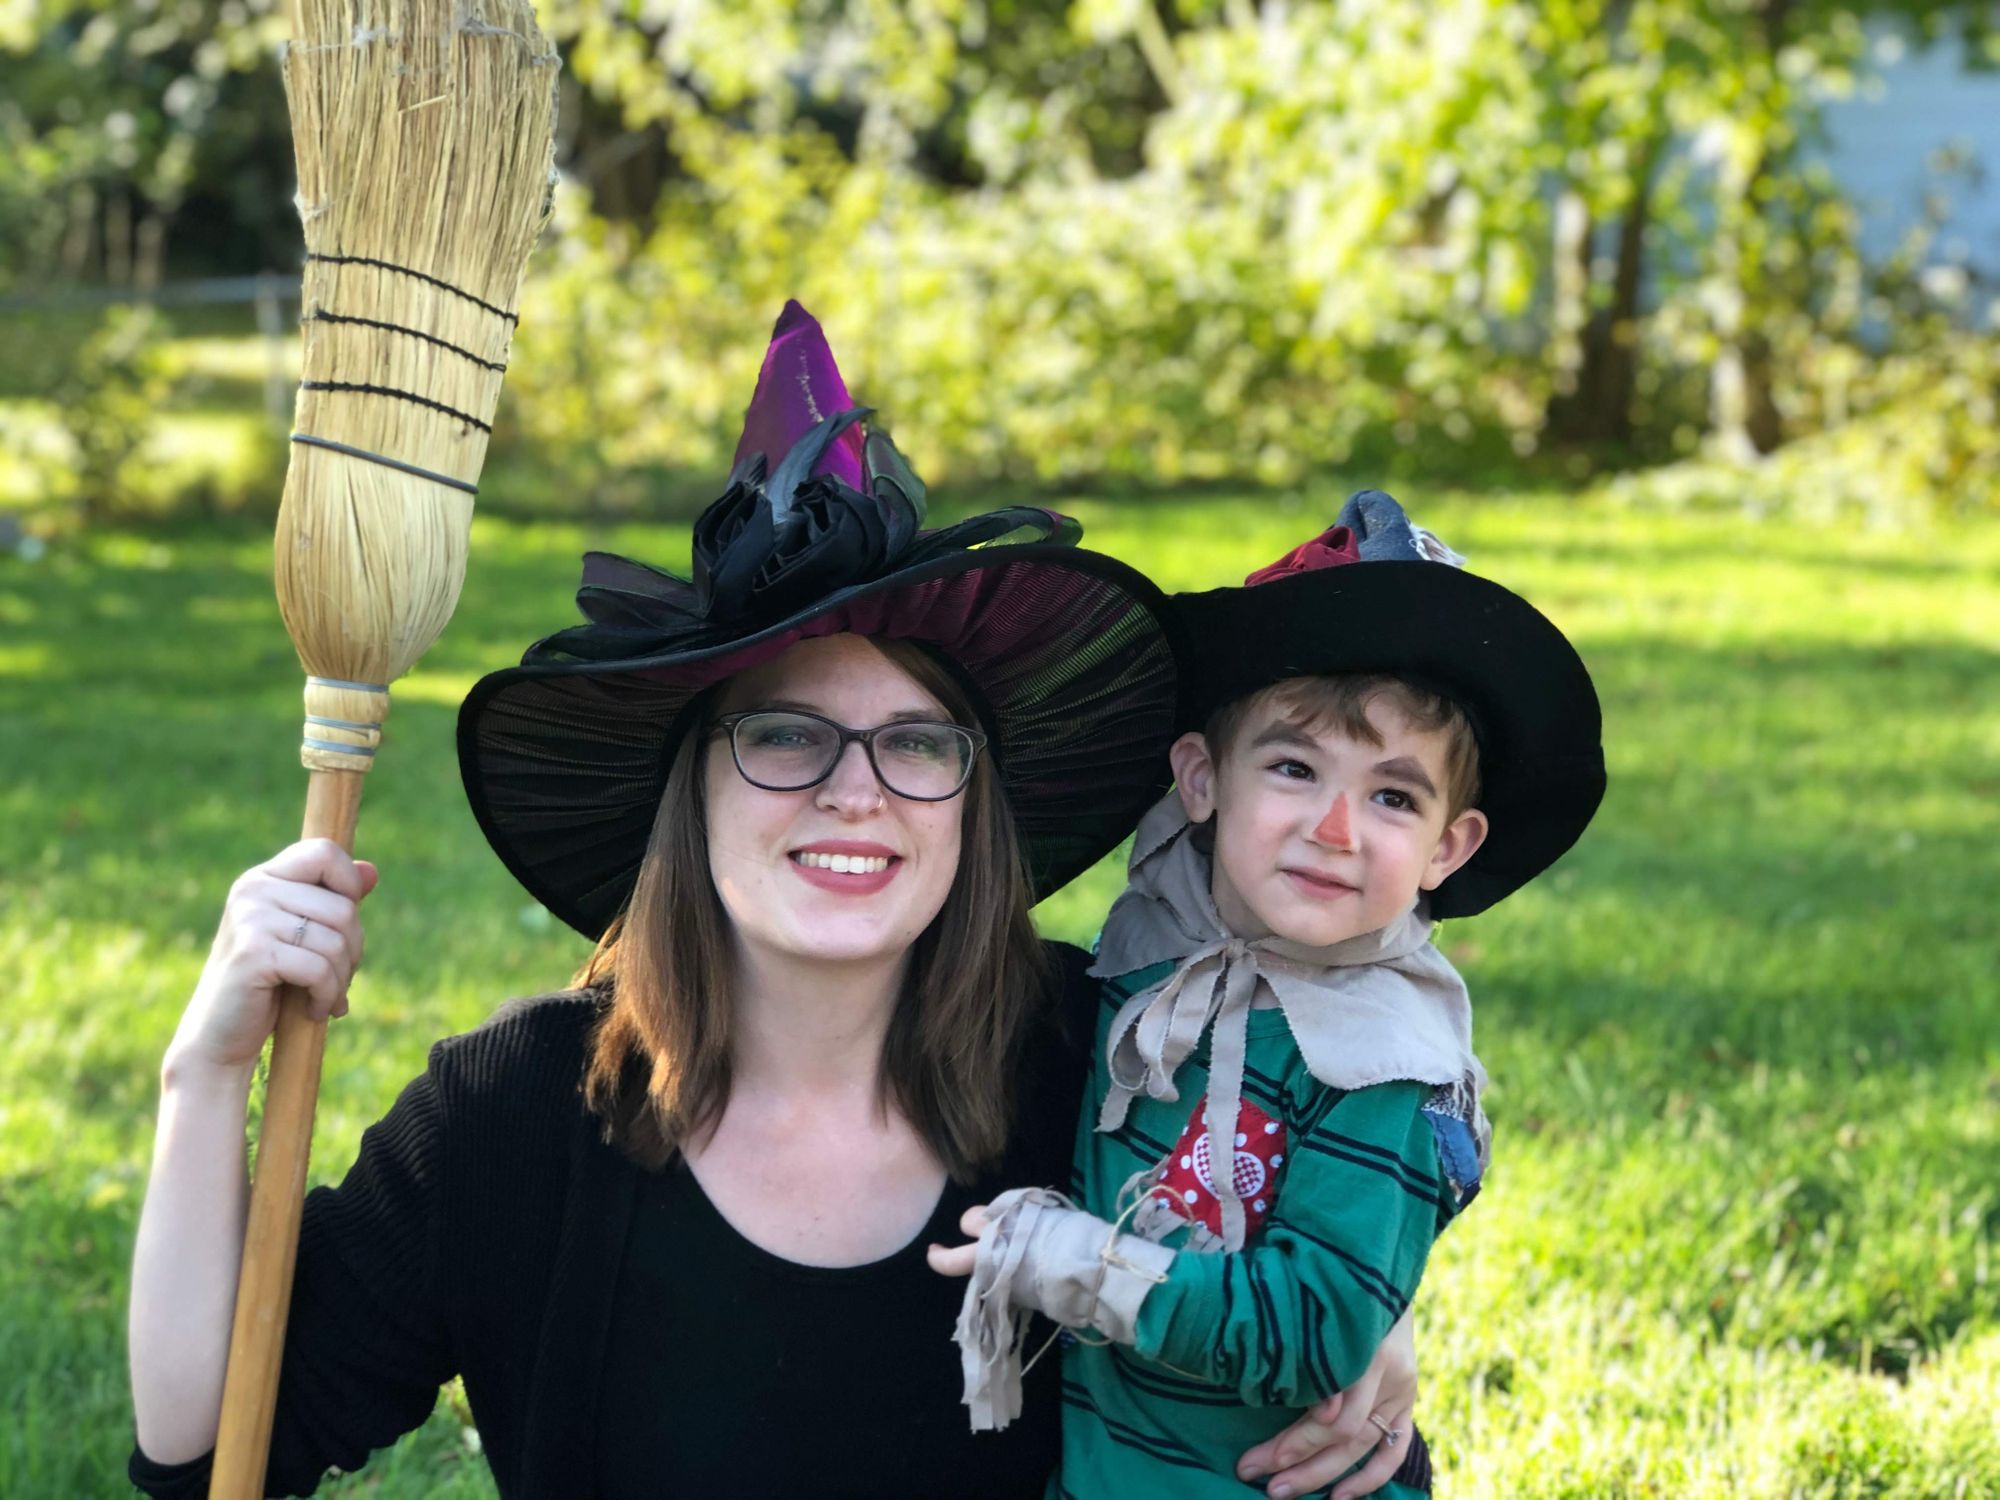 2019 Halloween Costumes, Part 2: The Witch and The Tin Man